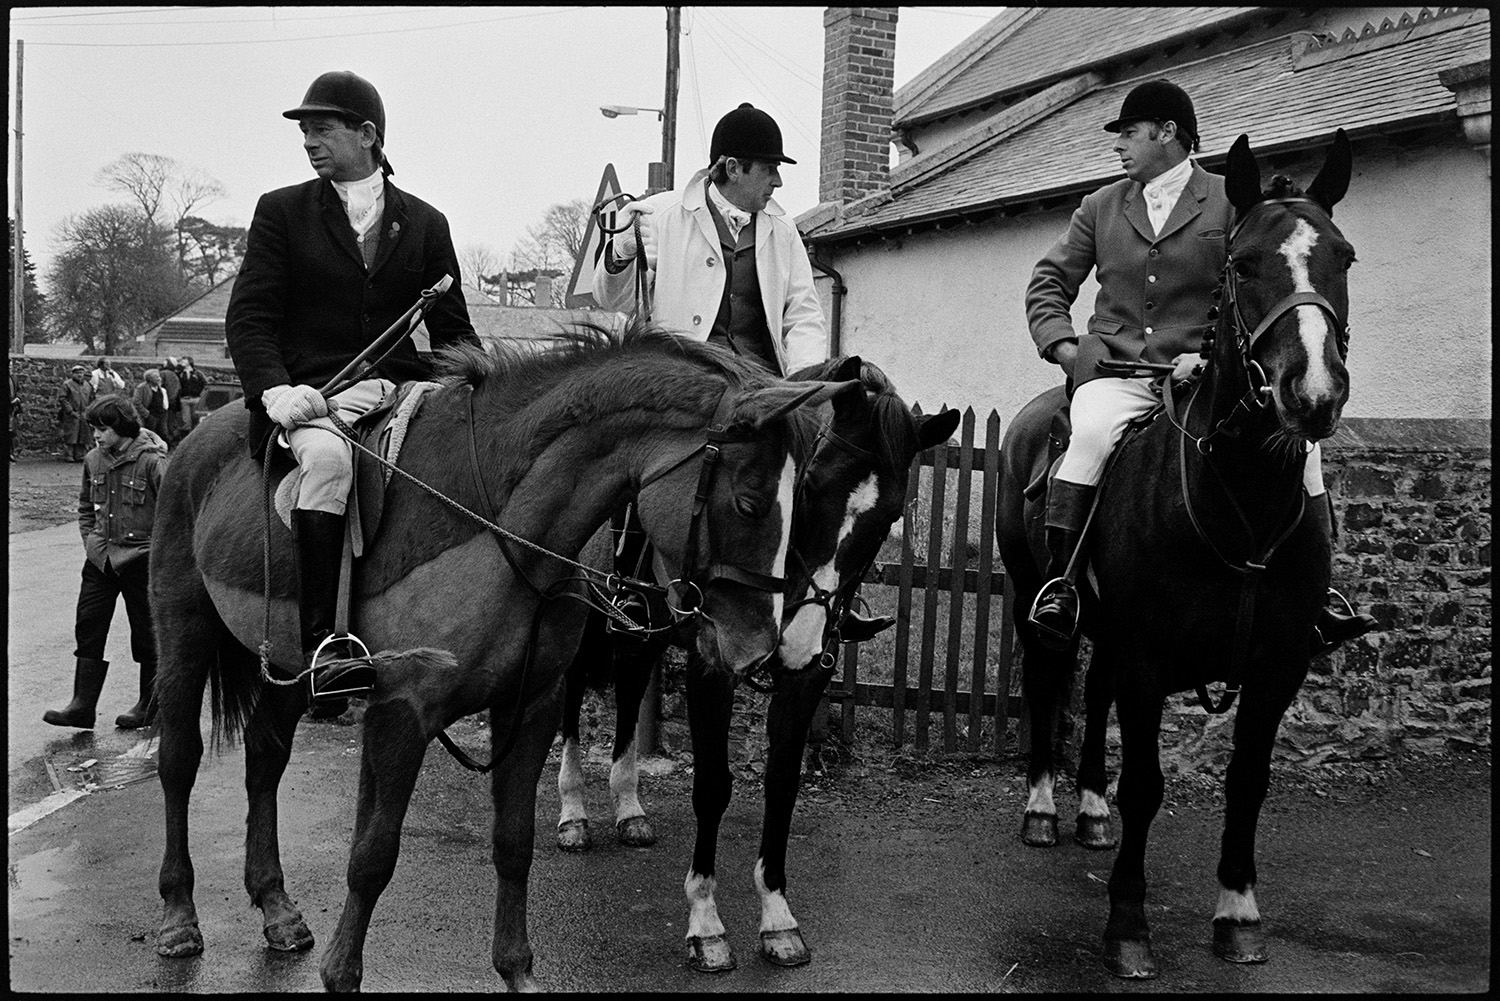 Hunt meet at village pub, with spectators, hounds and huntsmen. 
[Three huntsmen on horseback at a hunt meet in High Bickington. Spectators can be seen in the background.]